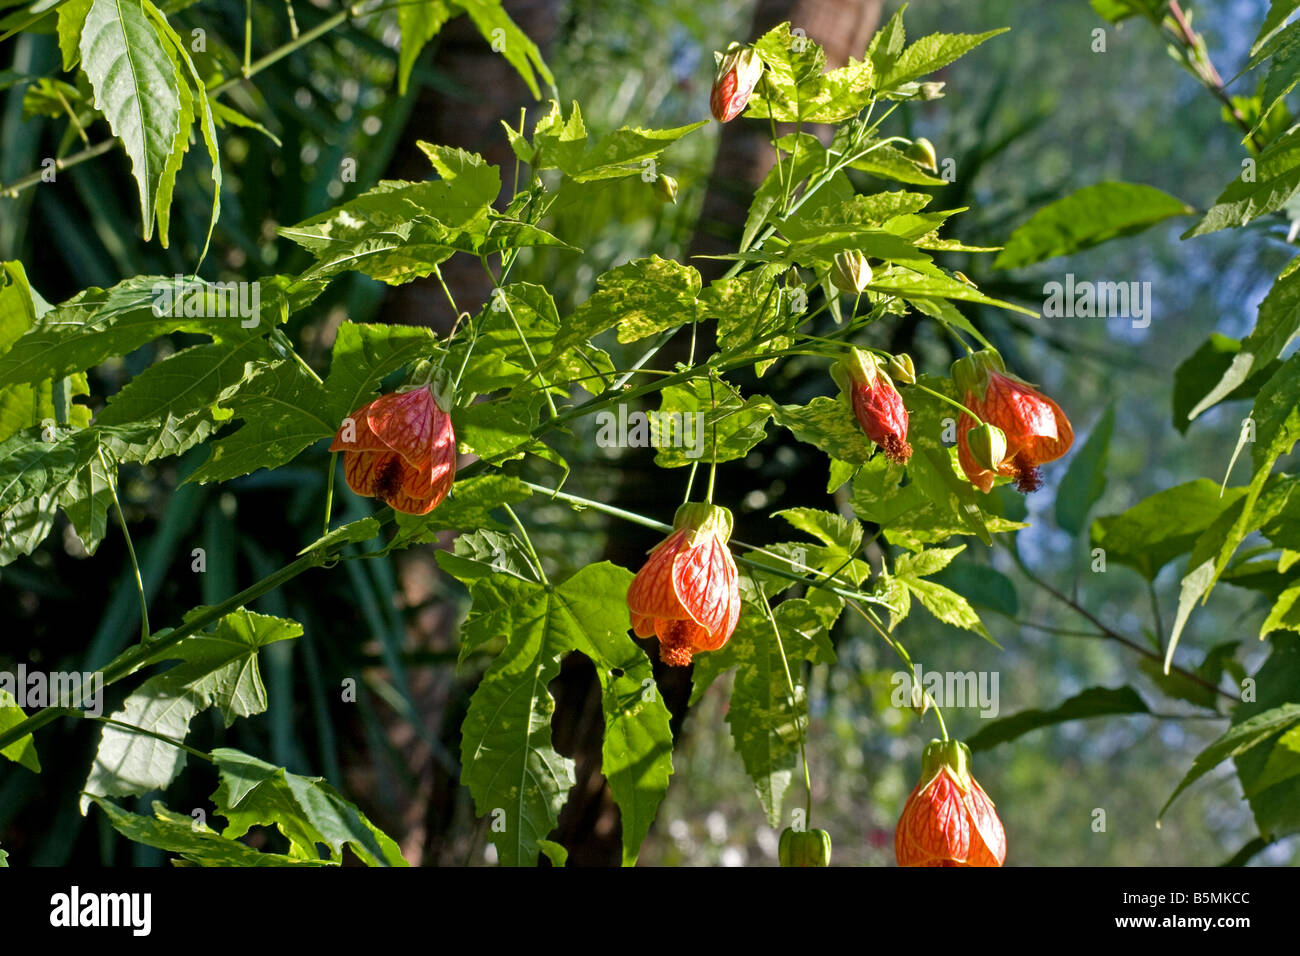 Red Vein Indian Mallow (Frameworks Pictun) Pflanze in voller Blüte Stockfoto